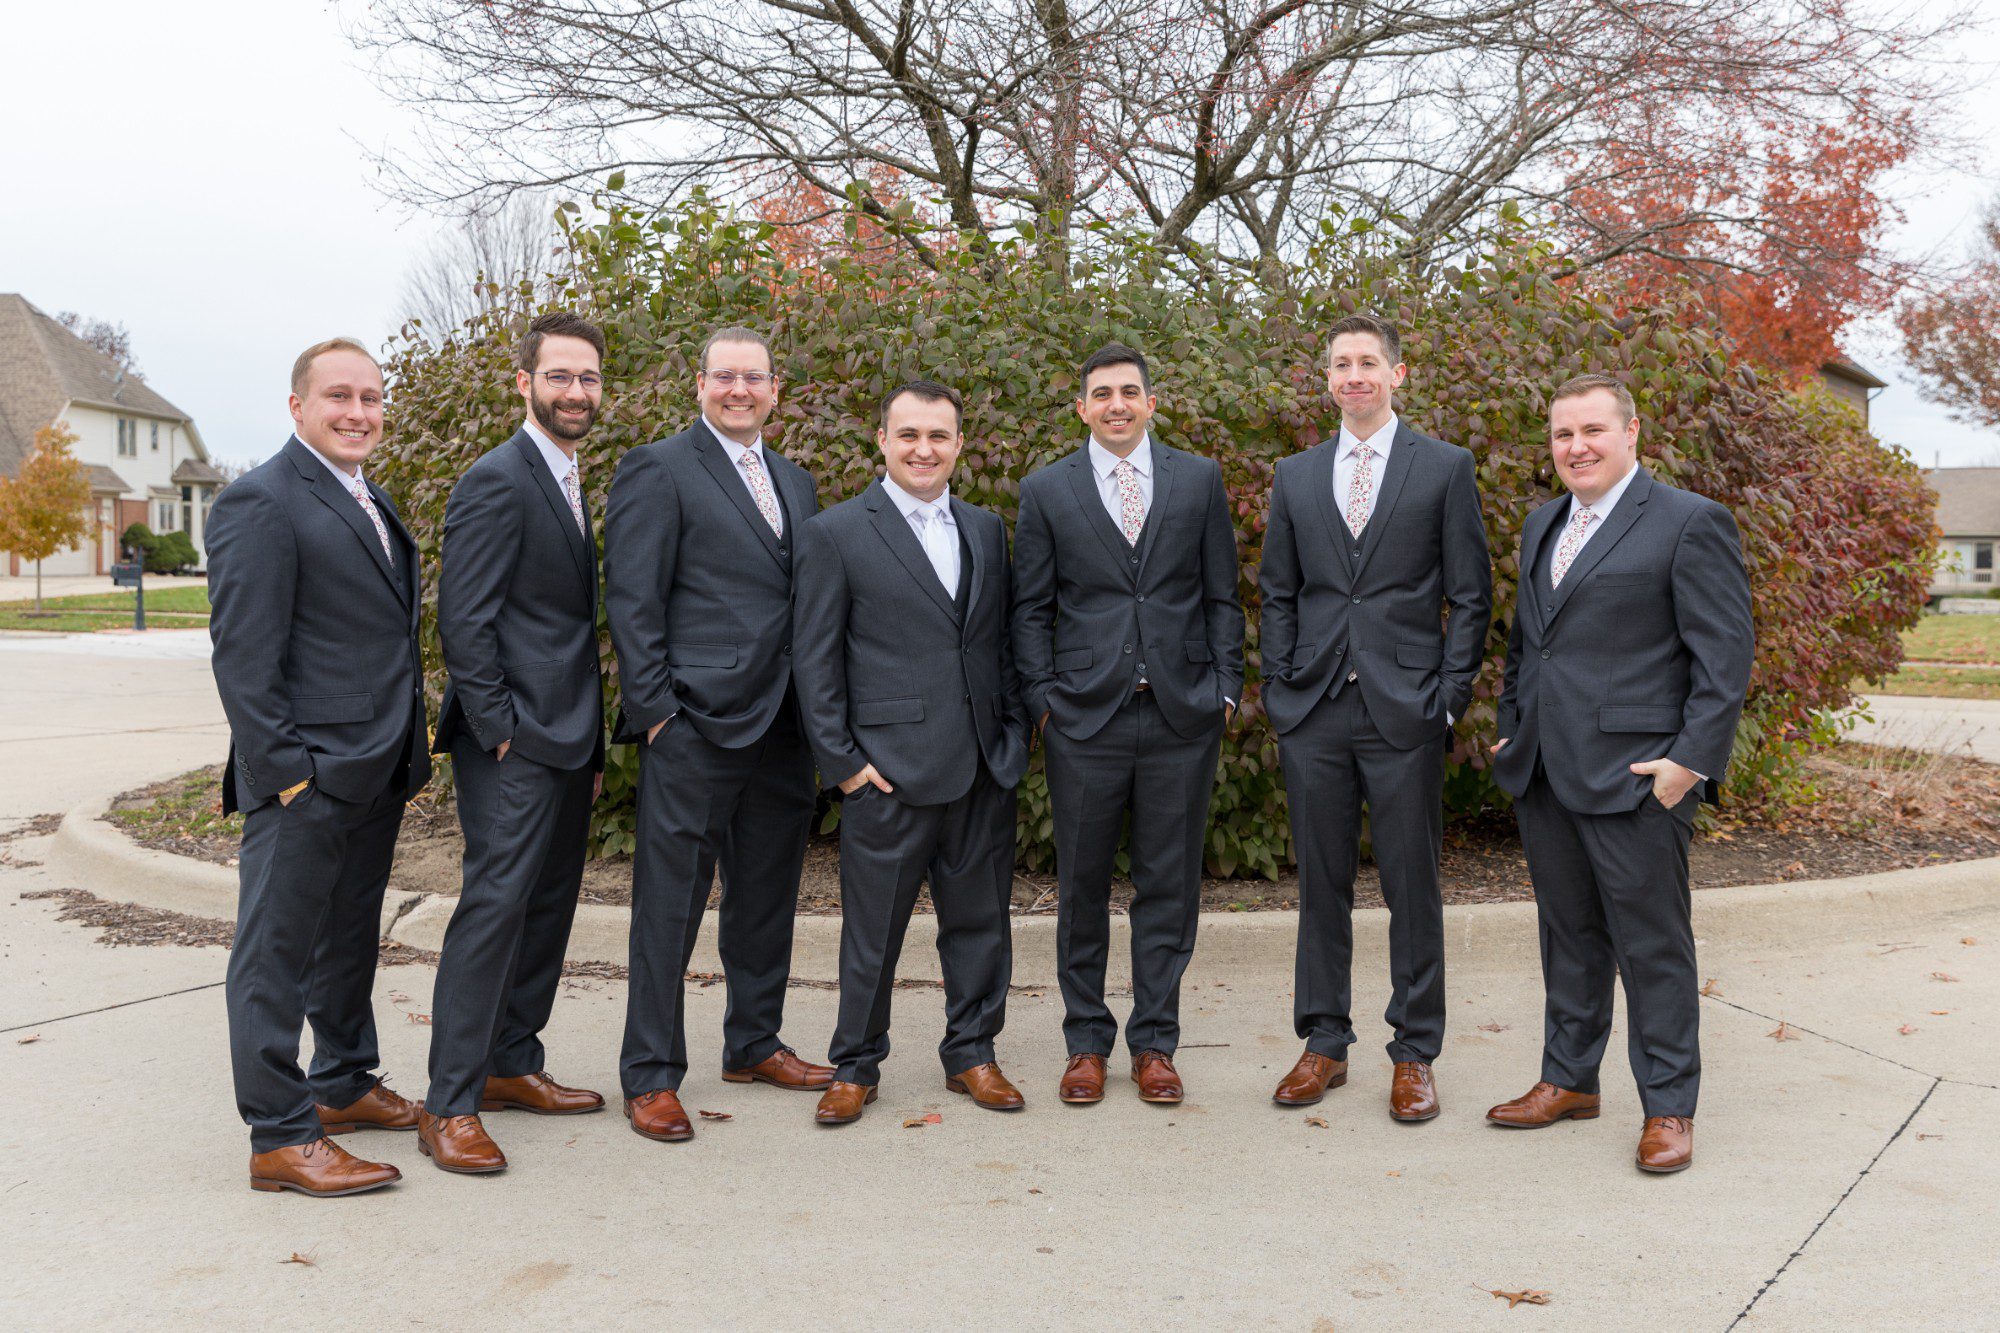 Wedding party in charcoal suits